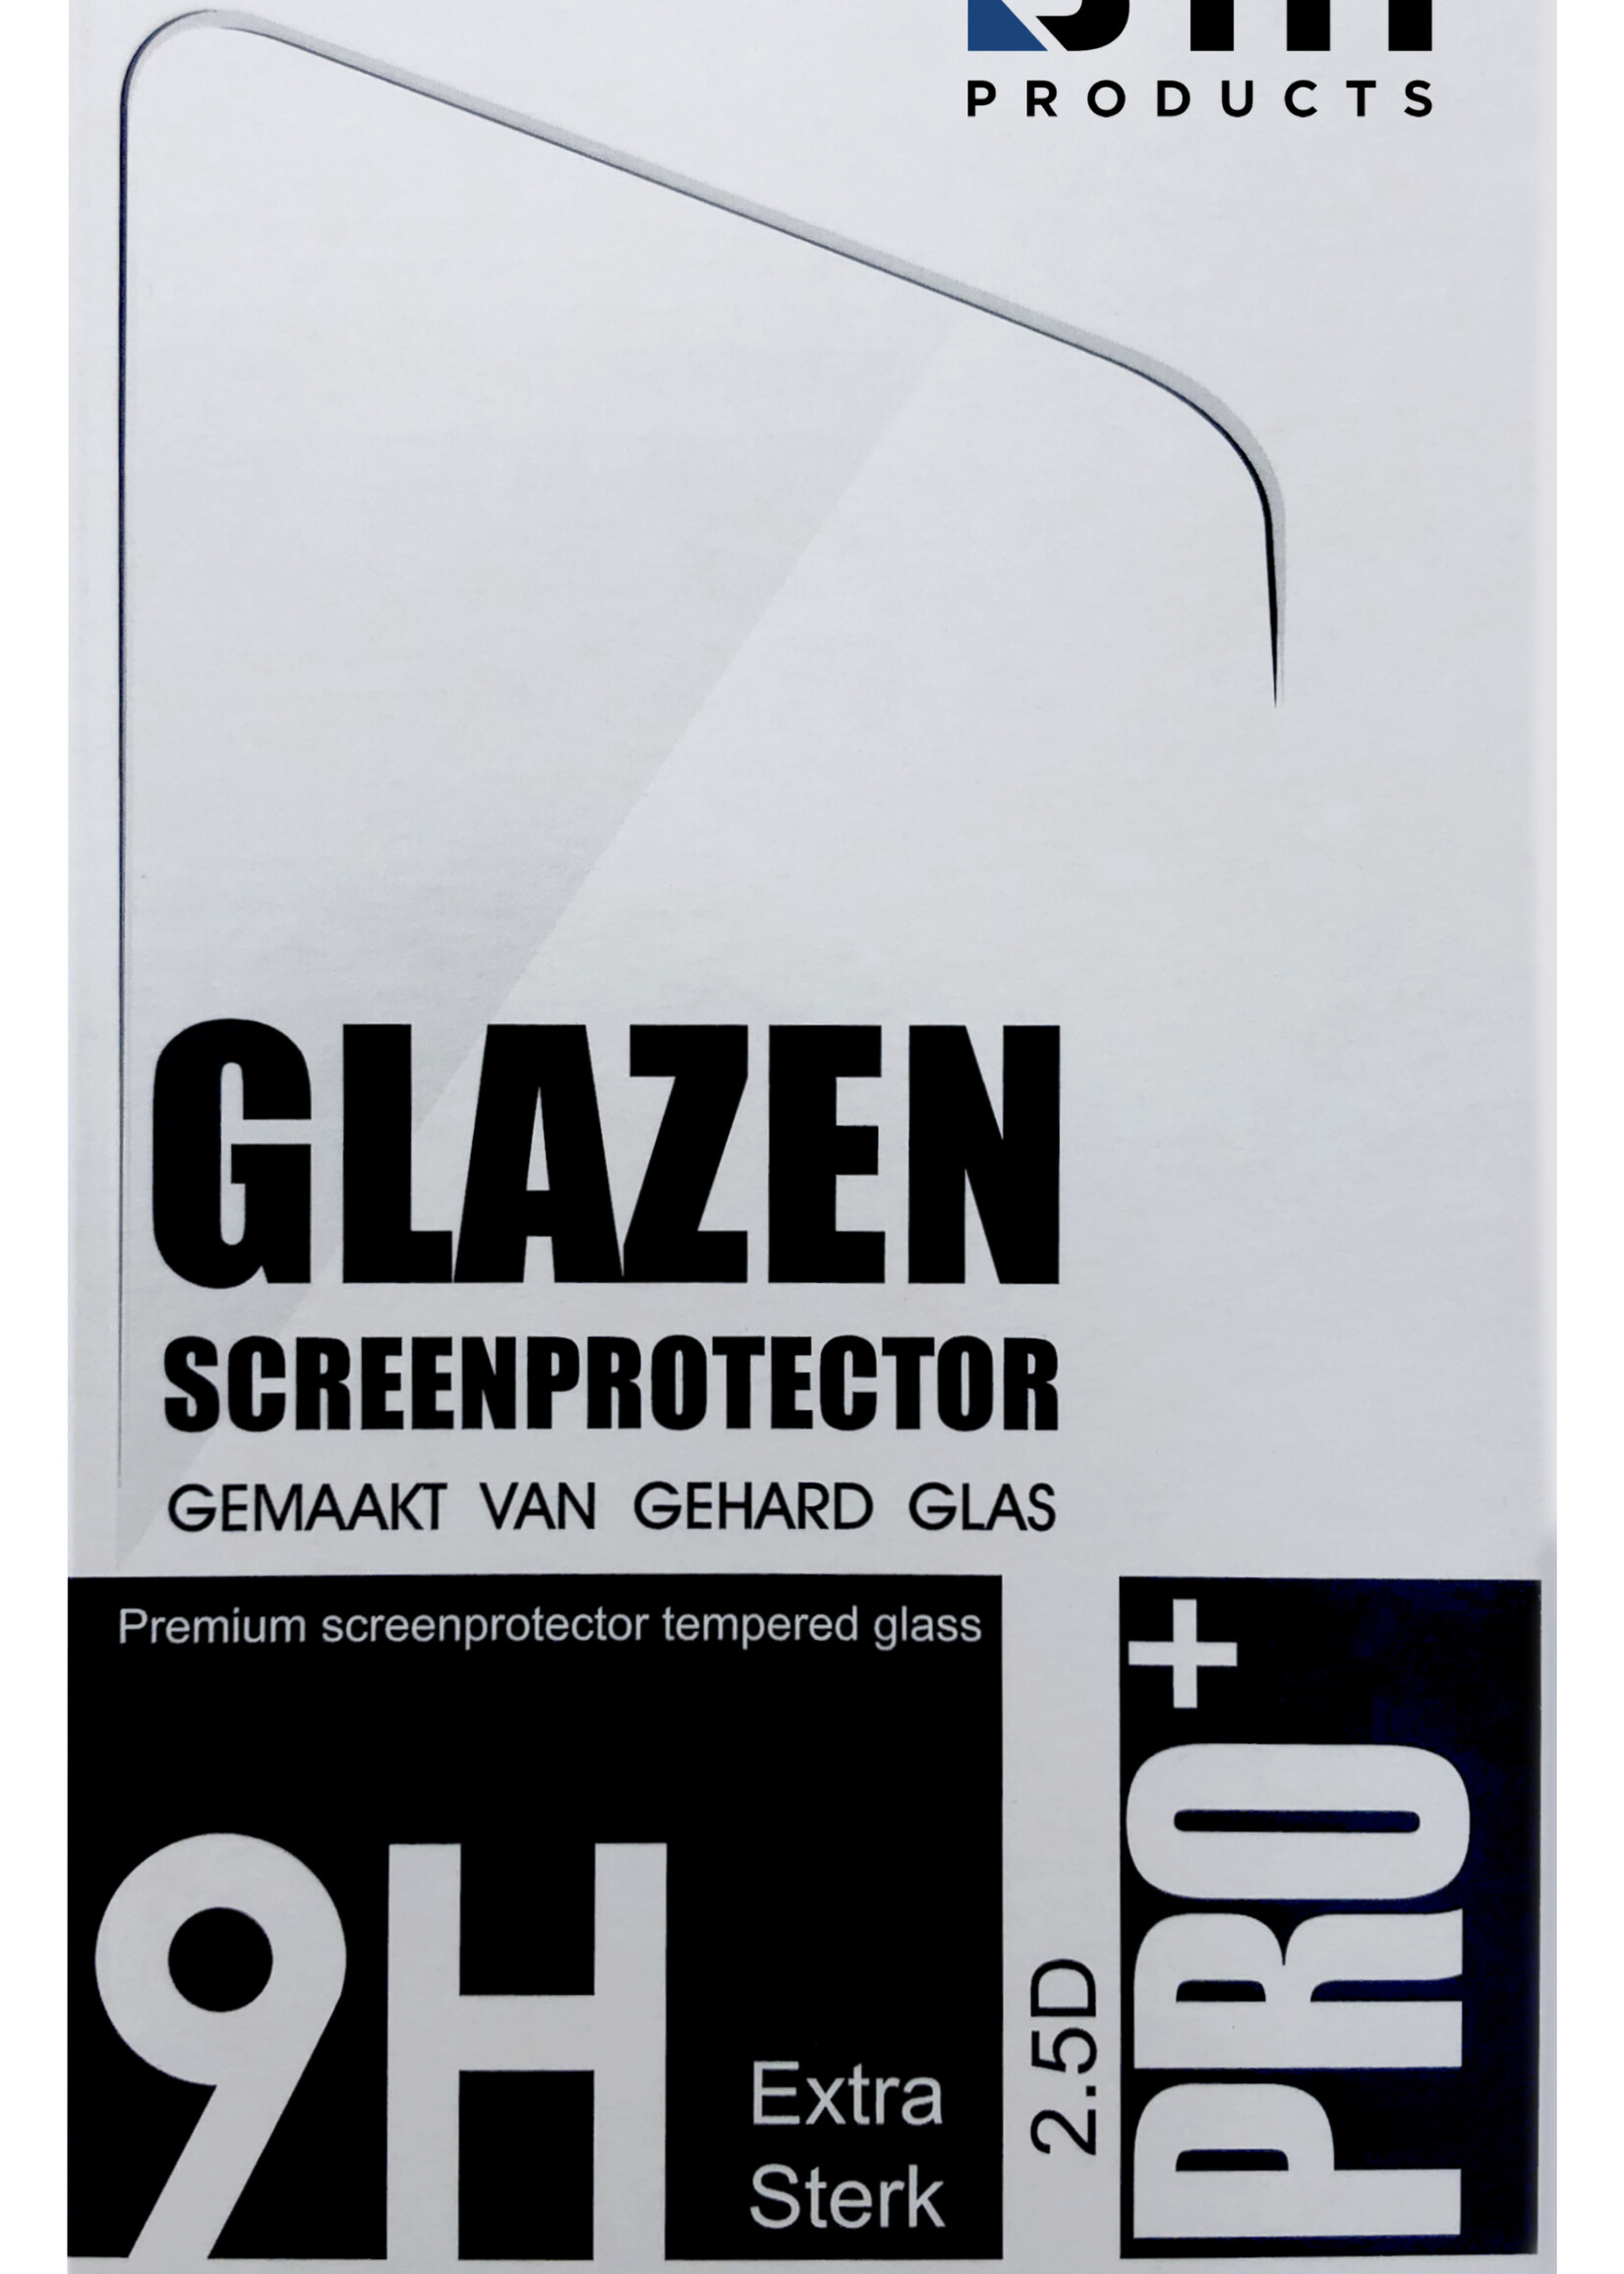 BTH Screenprotector Geschikt voor Samsung S22 Screenprotector Privacy Glas Gehard Full Cover - Screenprotector Geschikt voor Samsung Galaxy S22 Screenprotector Privacy Tempered Glass - 2 PACK